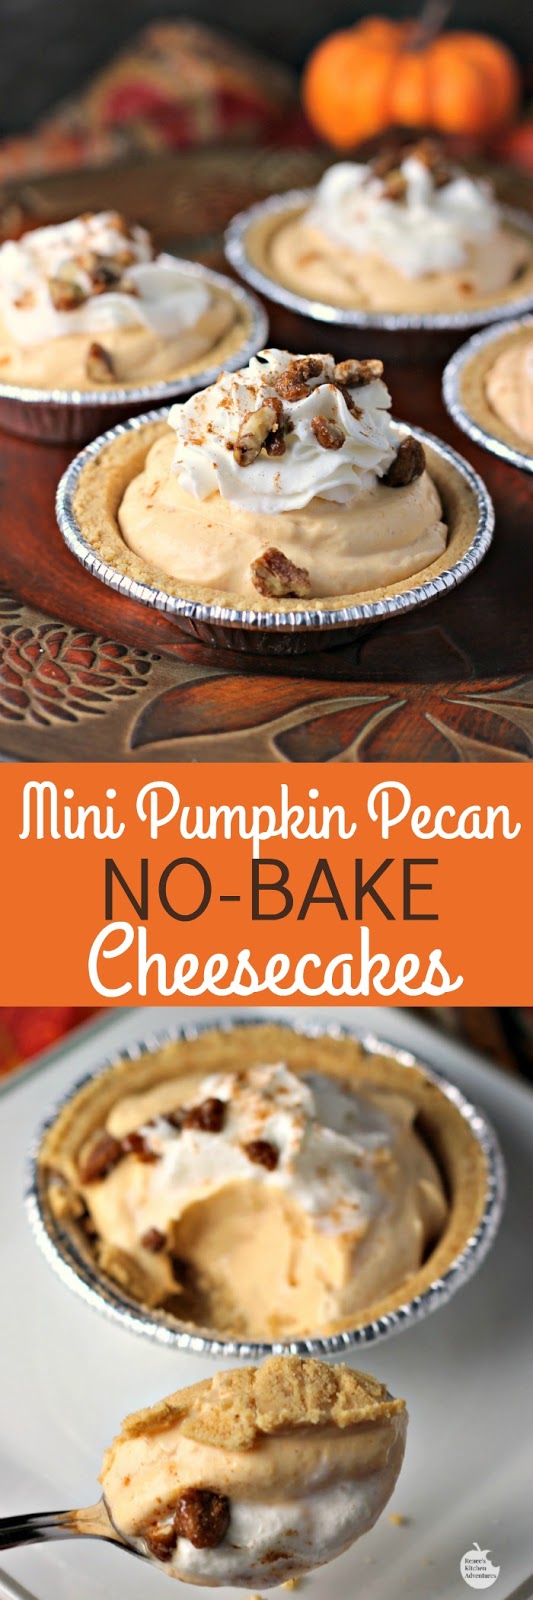 Mini Pumpkin Pecan No-Bake Cheesecakes | by Renee's Kitchen Adventures - easy dessert recipe for little pumpkin cheesecakes perfect for Thanksgiving or Christmas holidays #EffortlessPies ad 